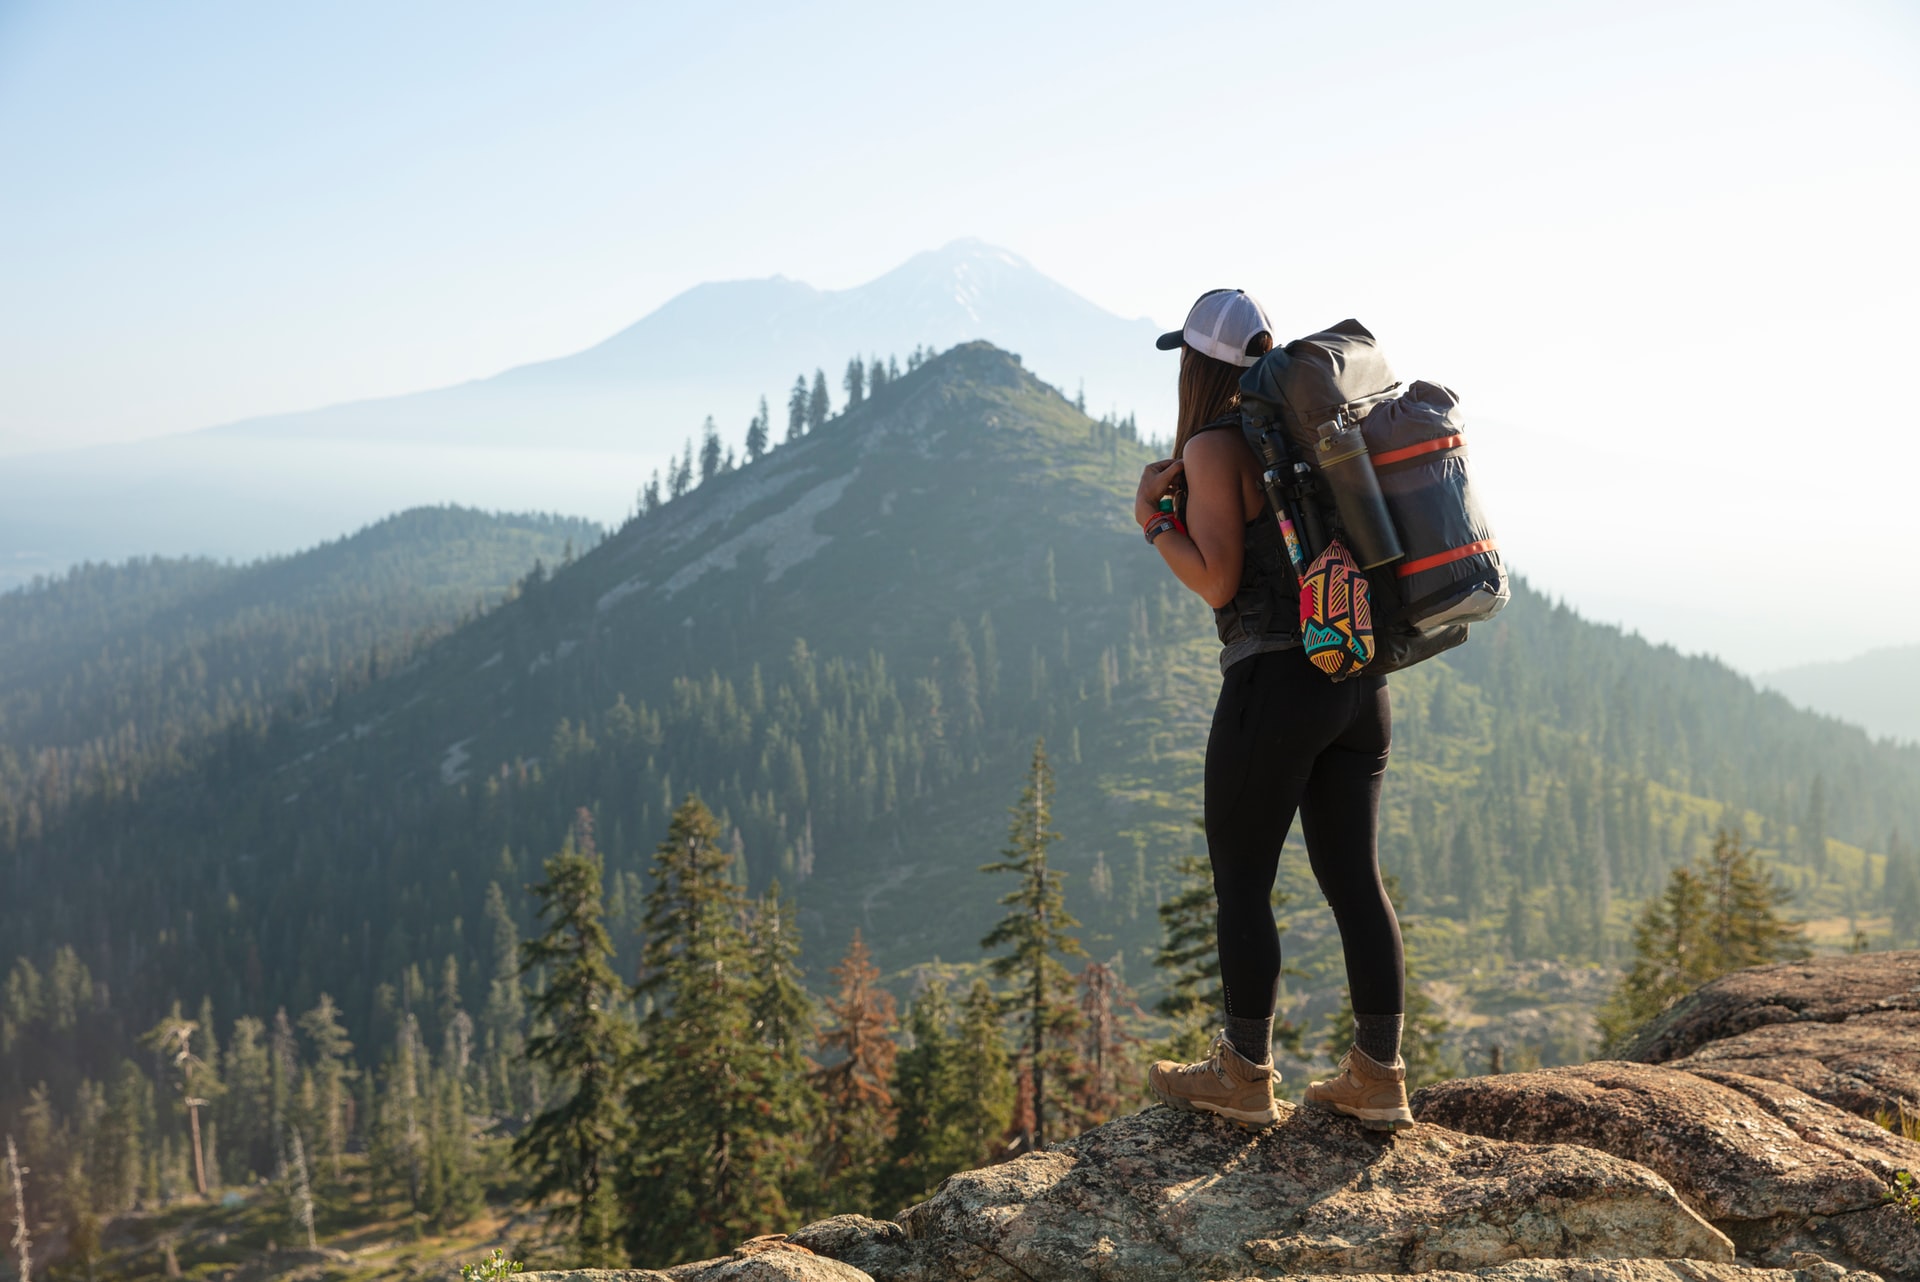 Woman with doing a solo hike with hiking gear looking out towards mountain landscape